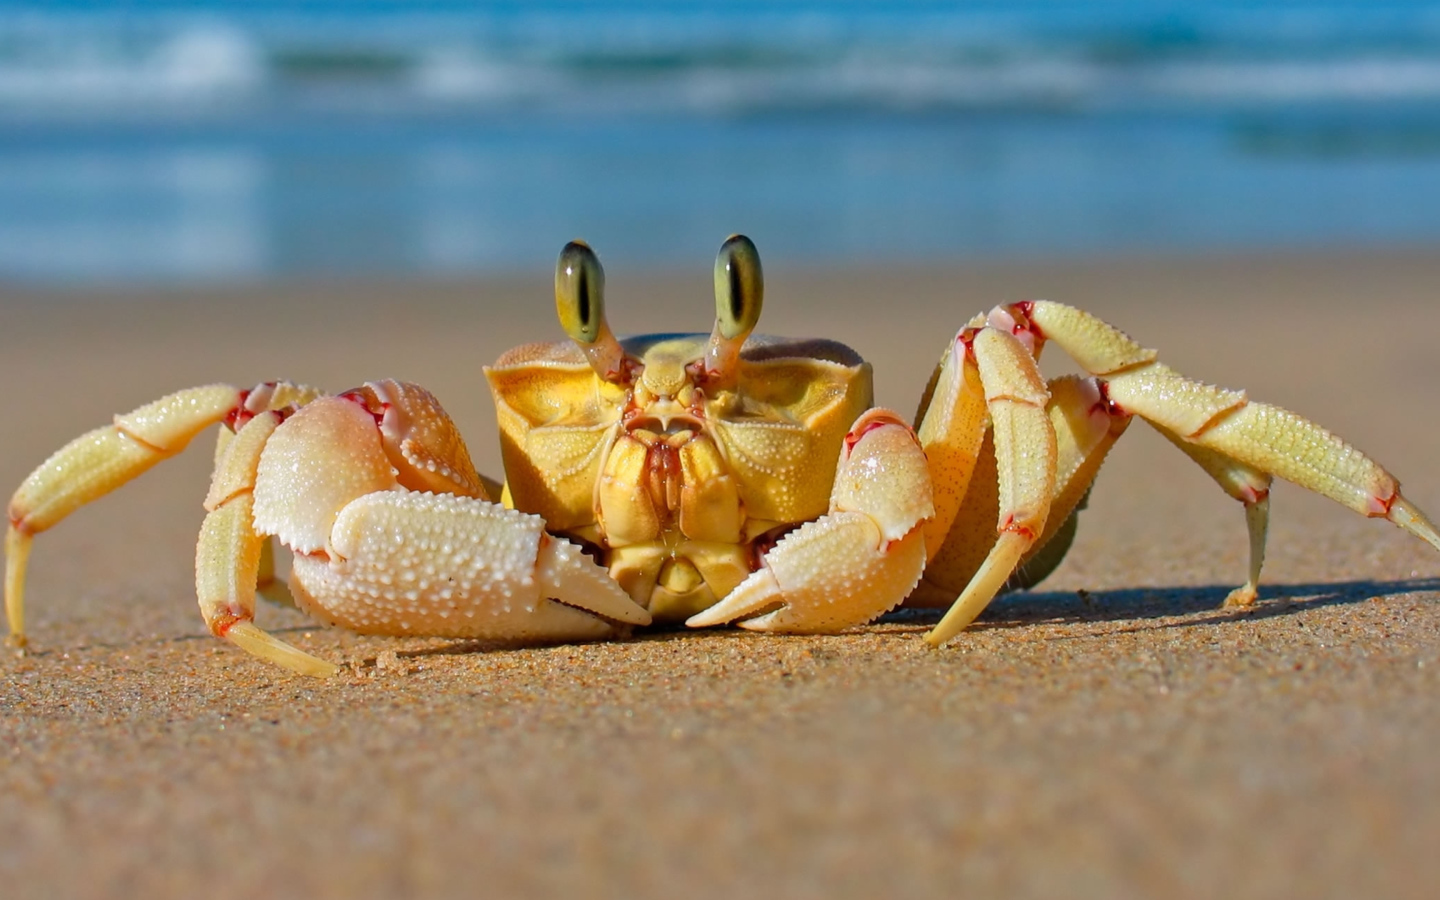 Big crab crawling in the sand